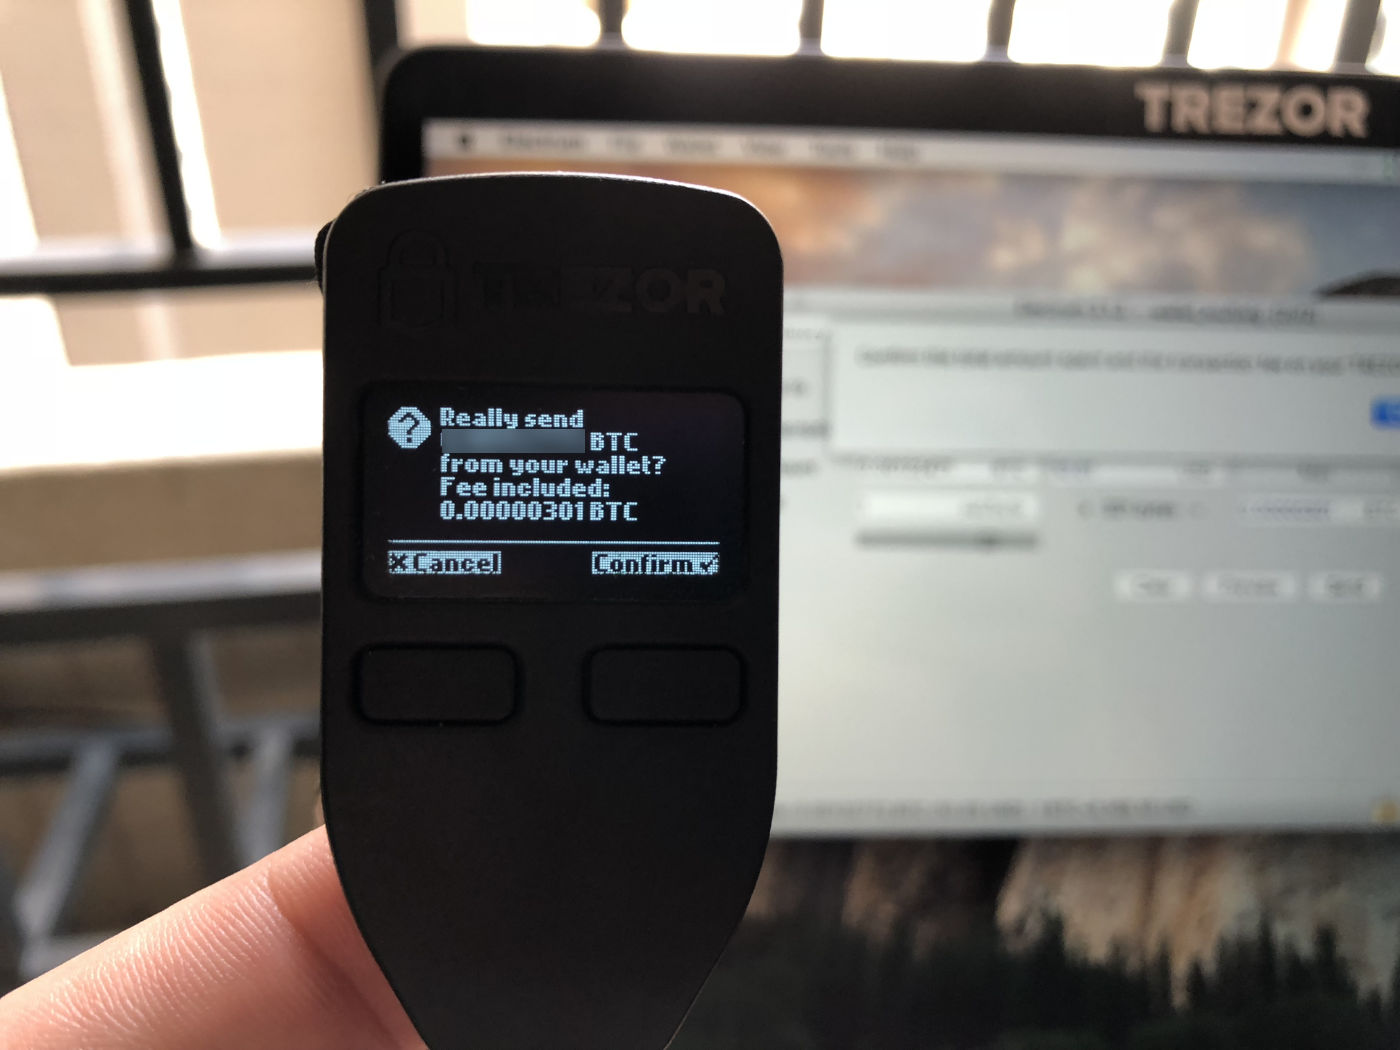 Confirming the transaction amount and mining fee on Trezor.